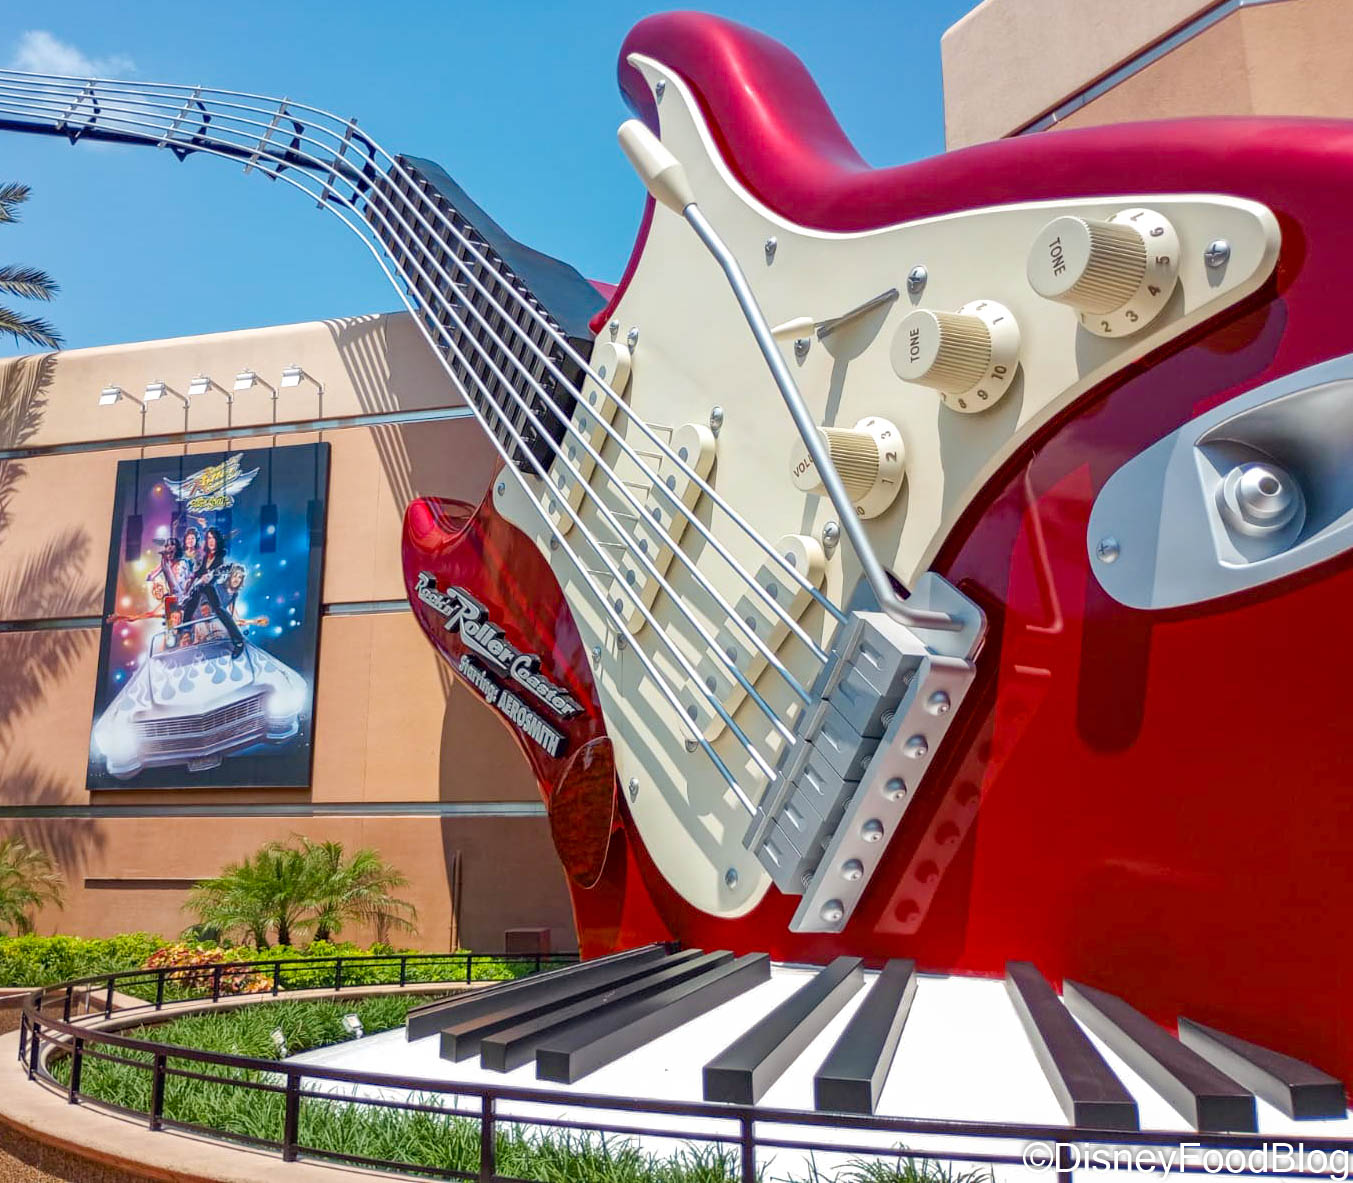 Walt Disney World Cast and Community - Cast Members at Rock 'n' Roller  Coaster Starring Aerosmith are ROCKIN' out today for National Guitar Day!  #FunFact - At 40 feet tall, the larger-than-life